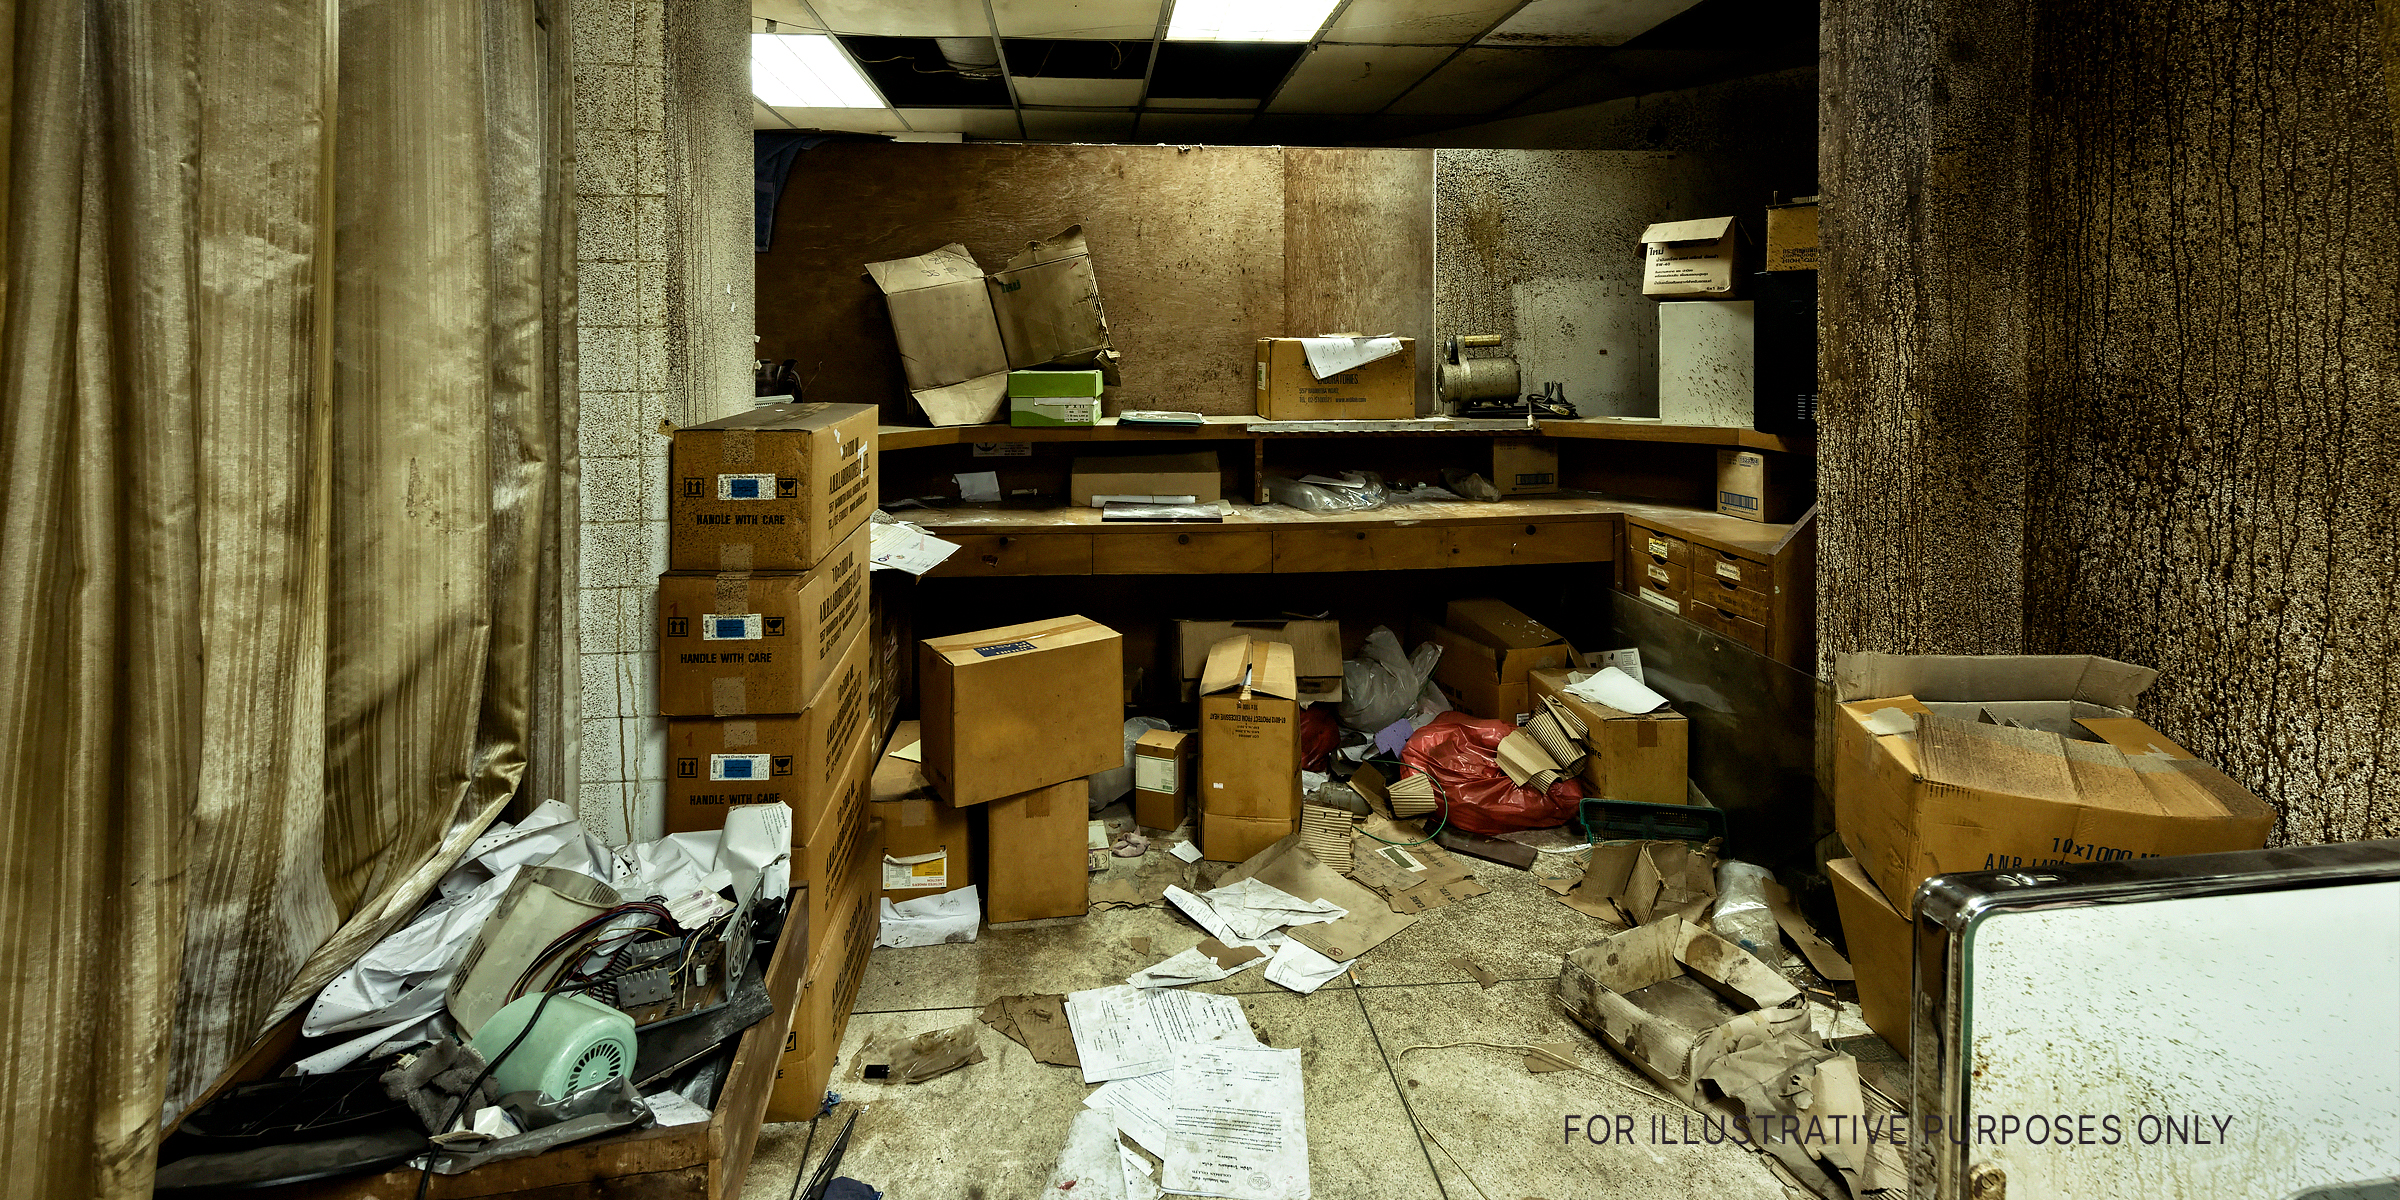 They found a basement filled with documents. | Source: freepik.com